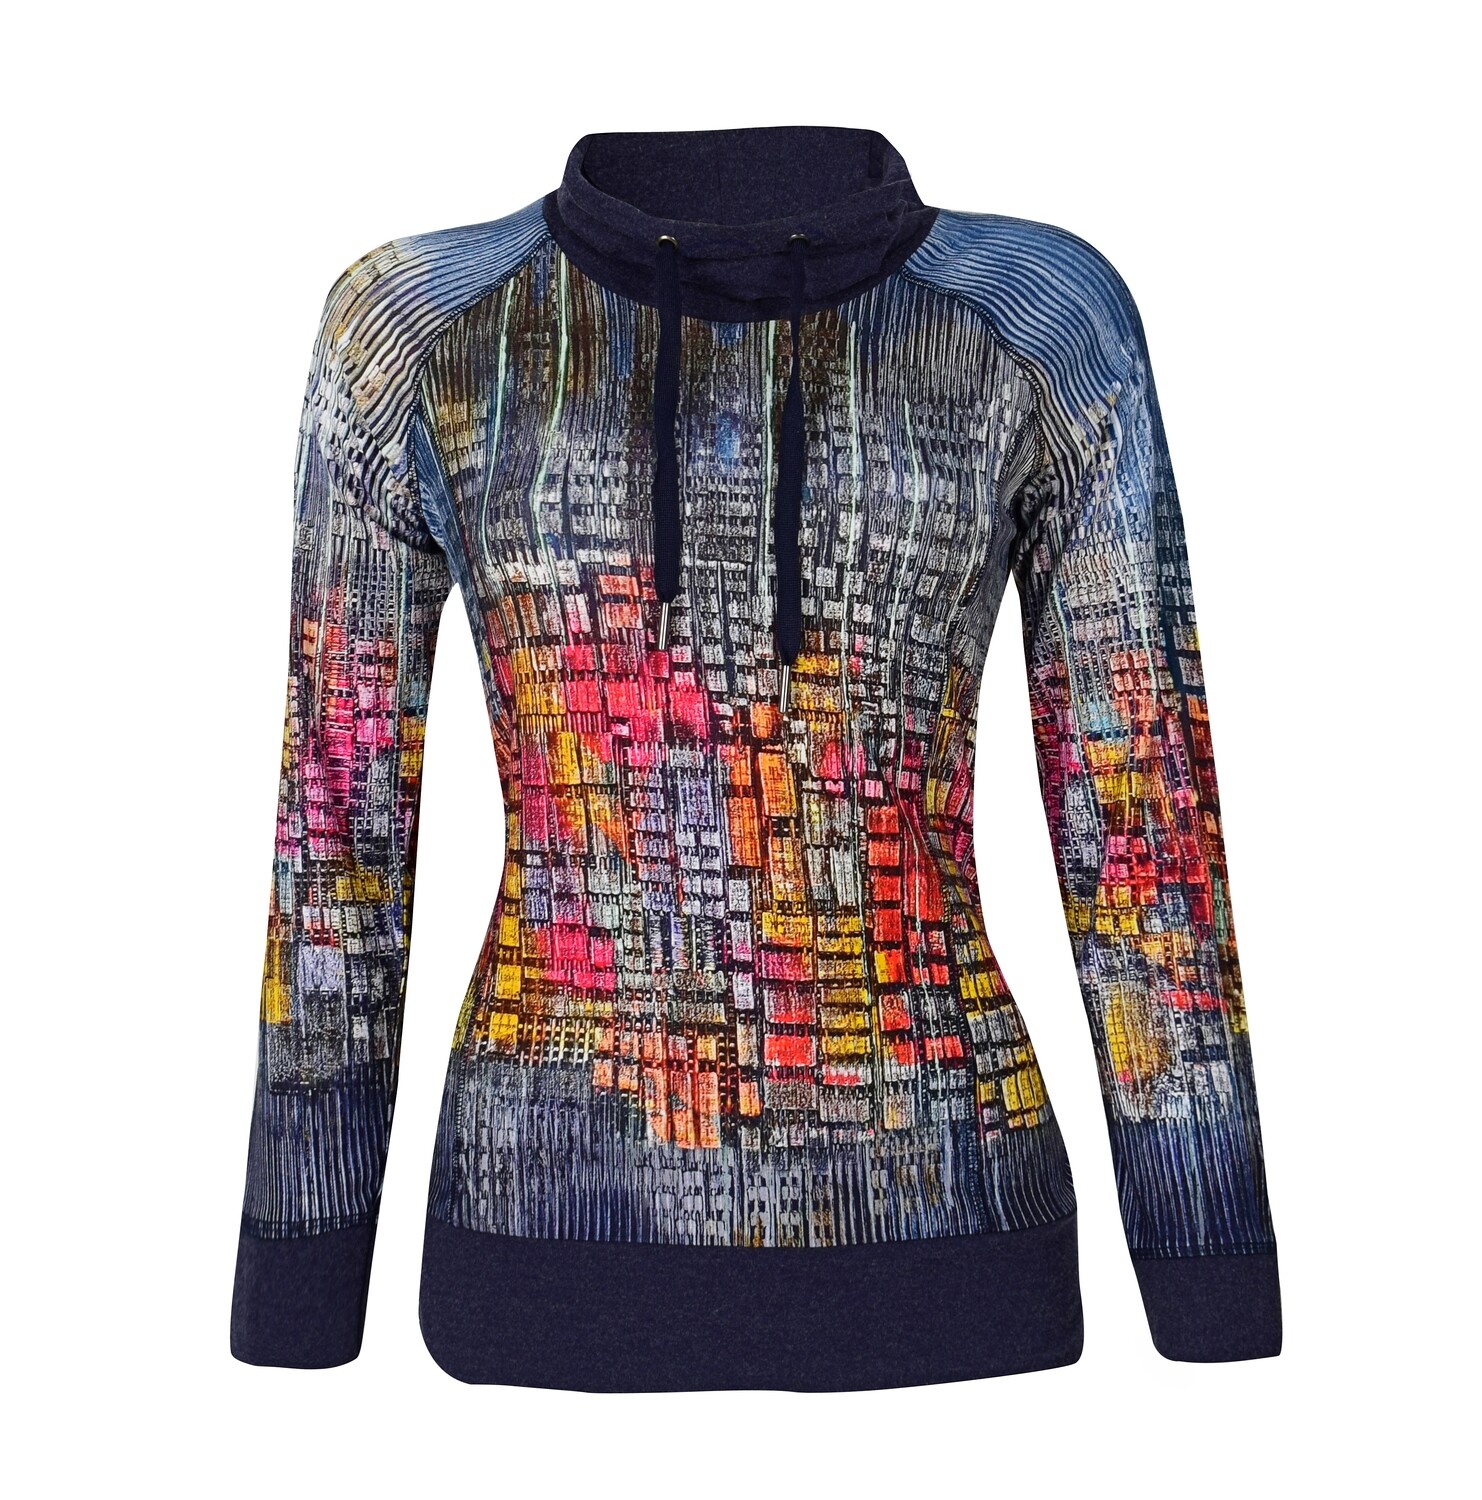 Simply Art Dolcezza: Papillons Of The Night Abstract Art Tunic SOLD OUT